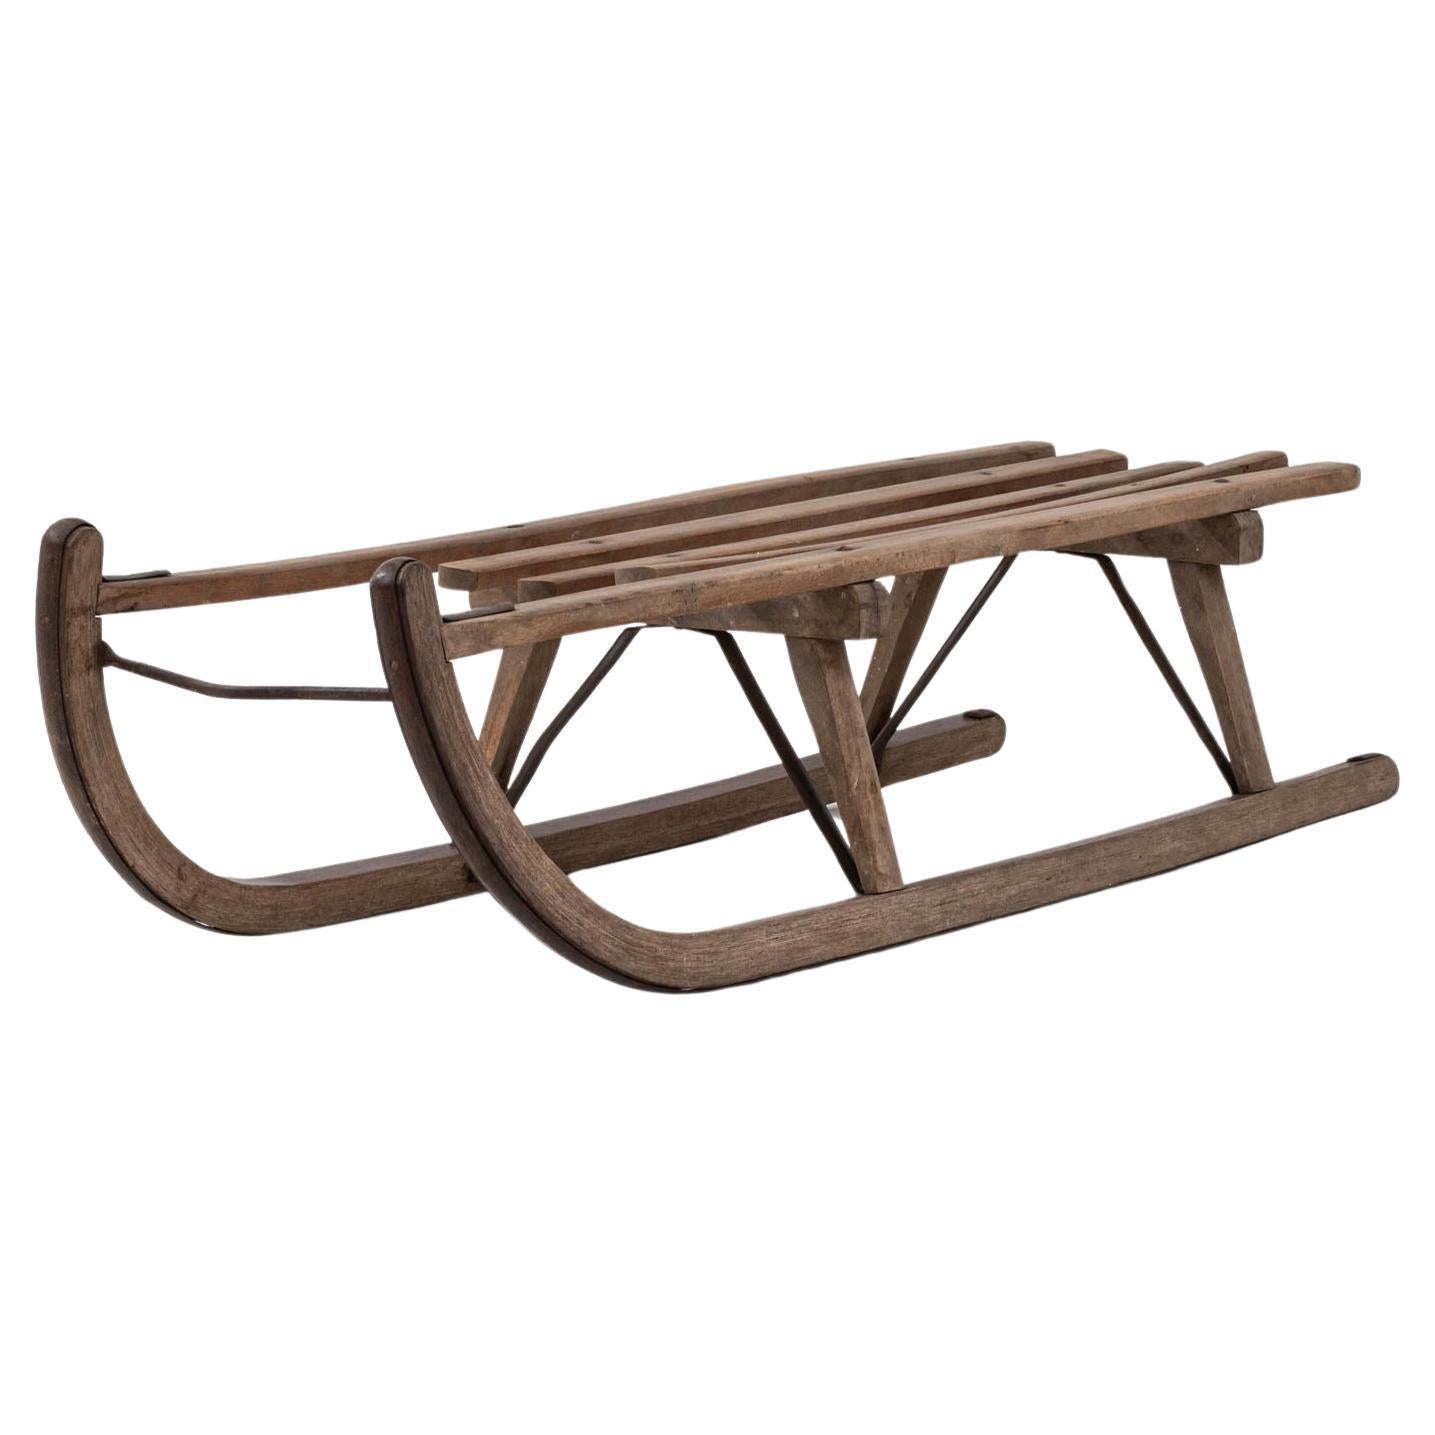 20th Century German Wooden Sled By Davos For Sale